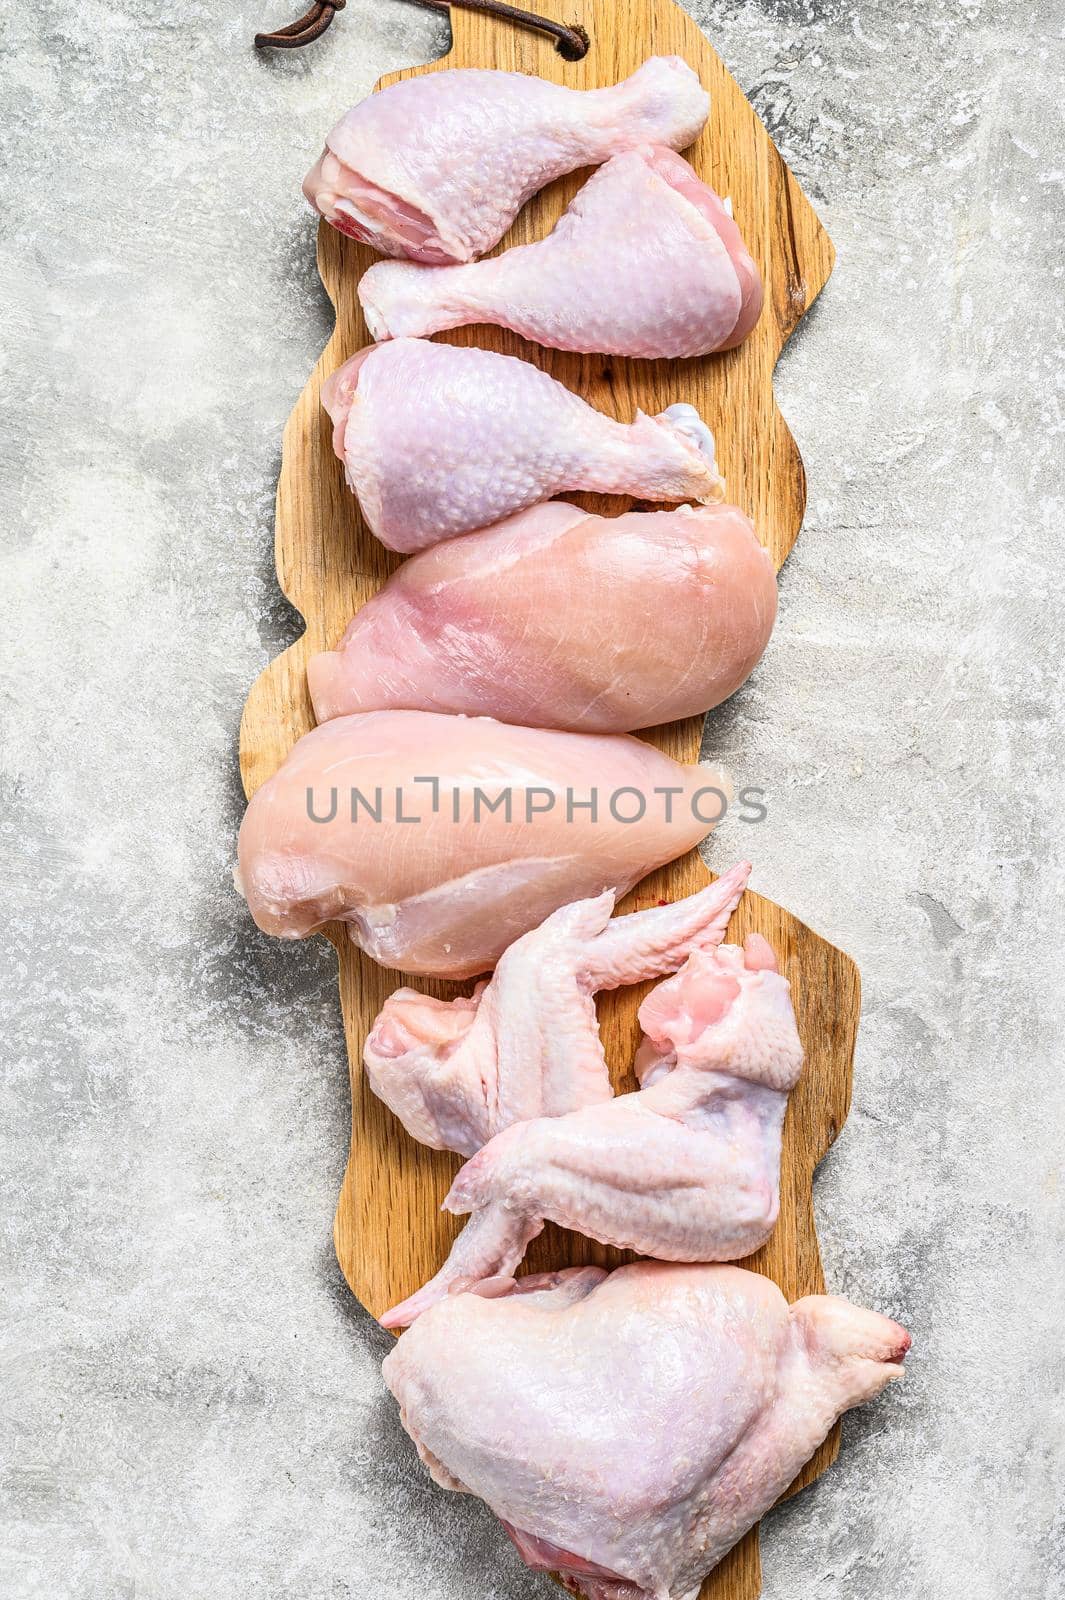 Raw uncooked chicken meat on a cutting board. Gray background. Top view by Composter